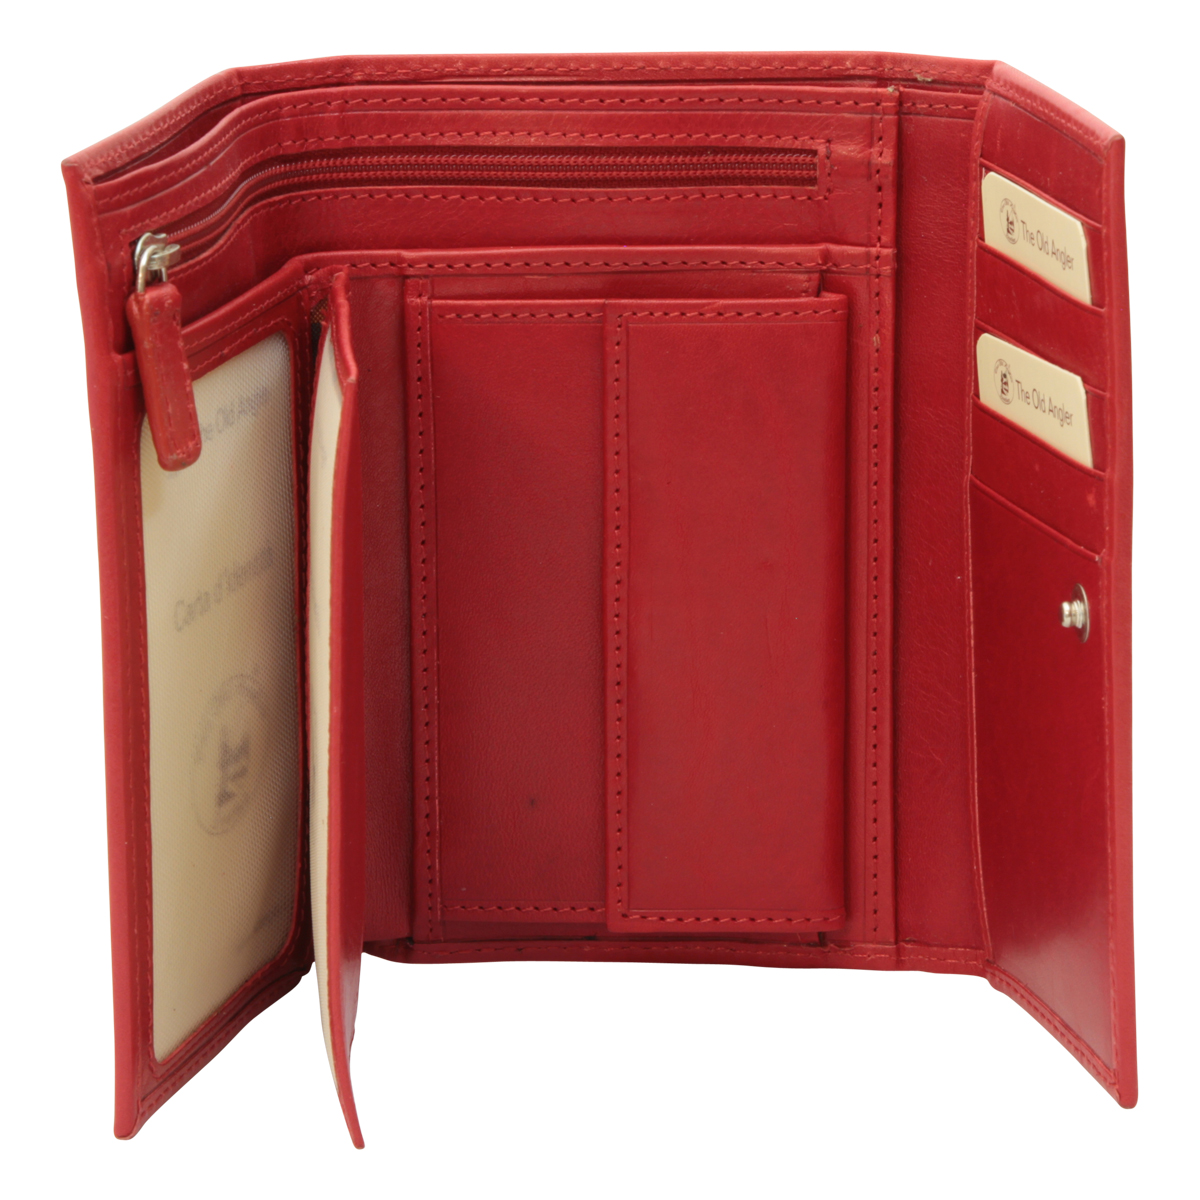 Leather wallet for women - red | 501789RO UK | Old Angler Firenze